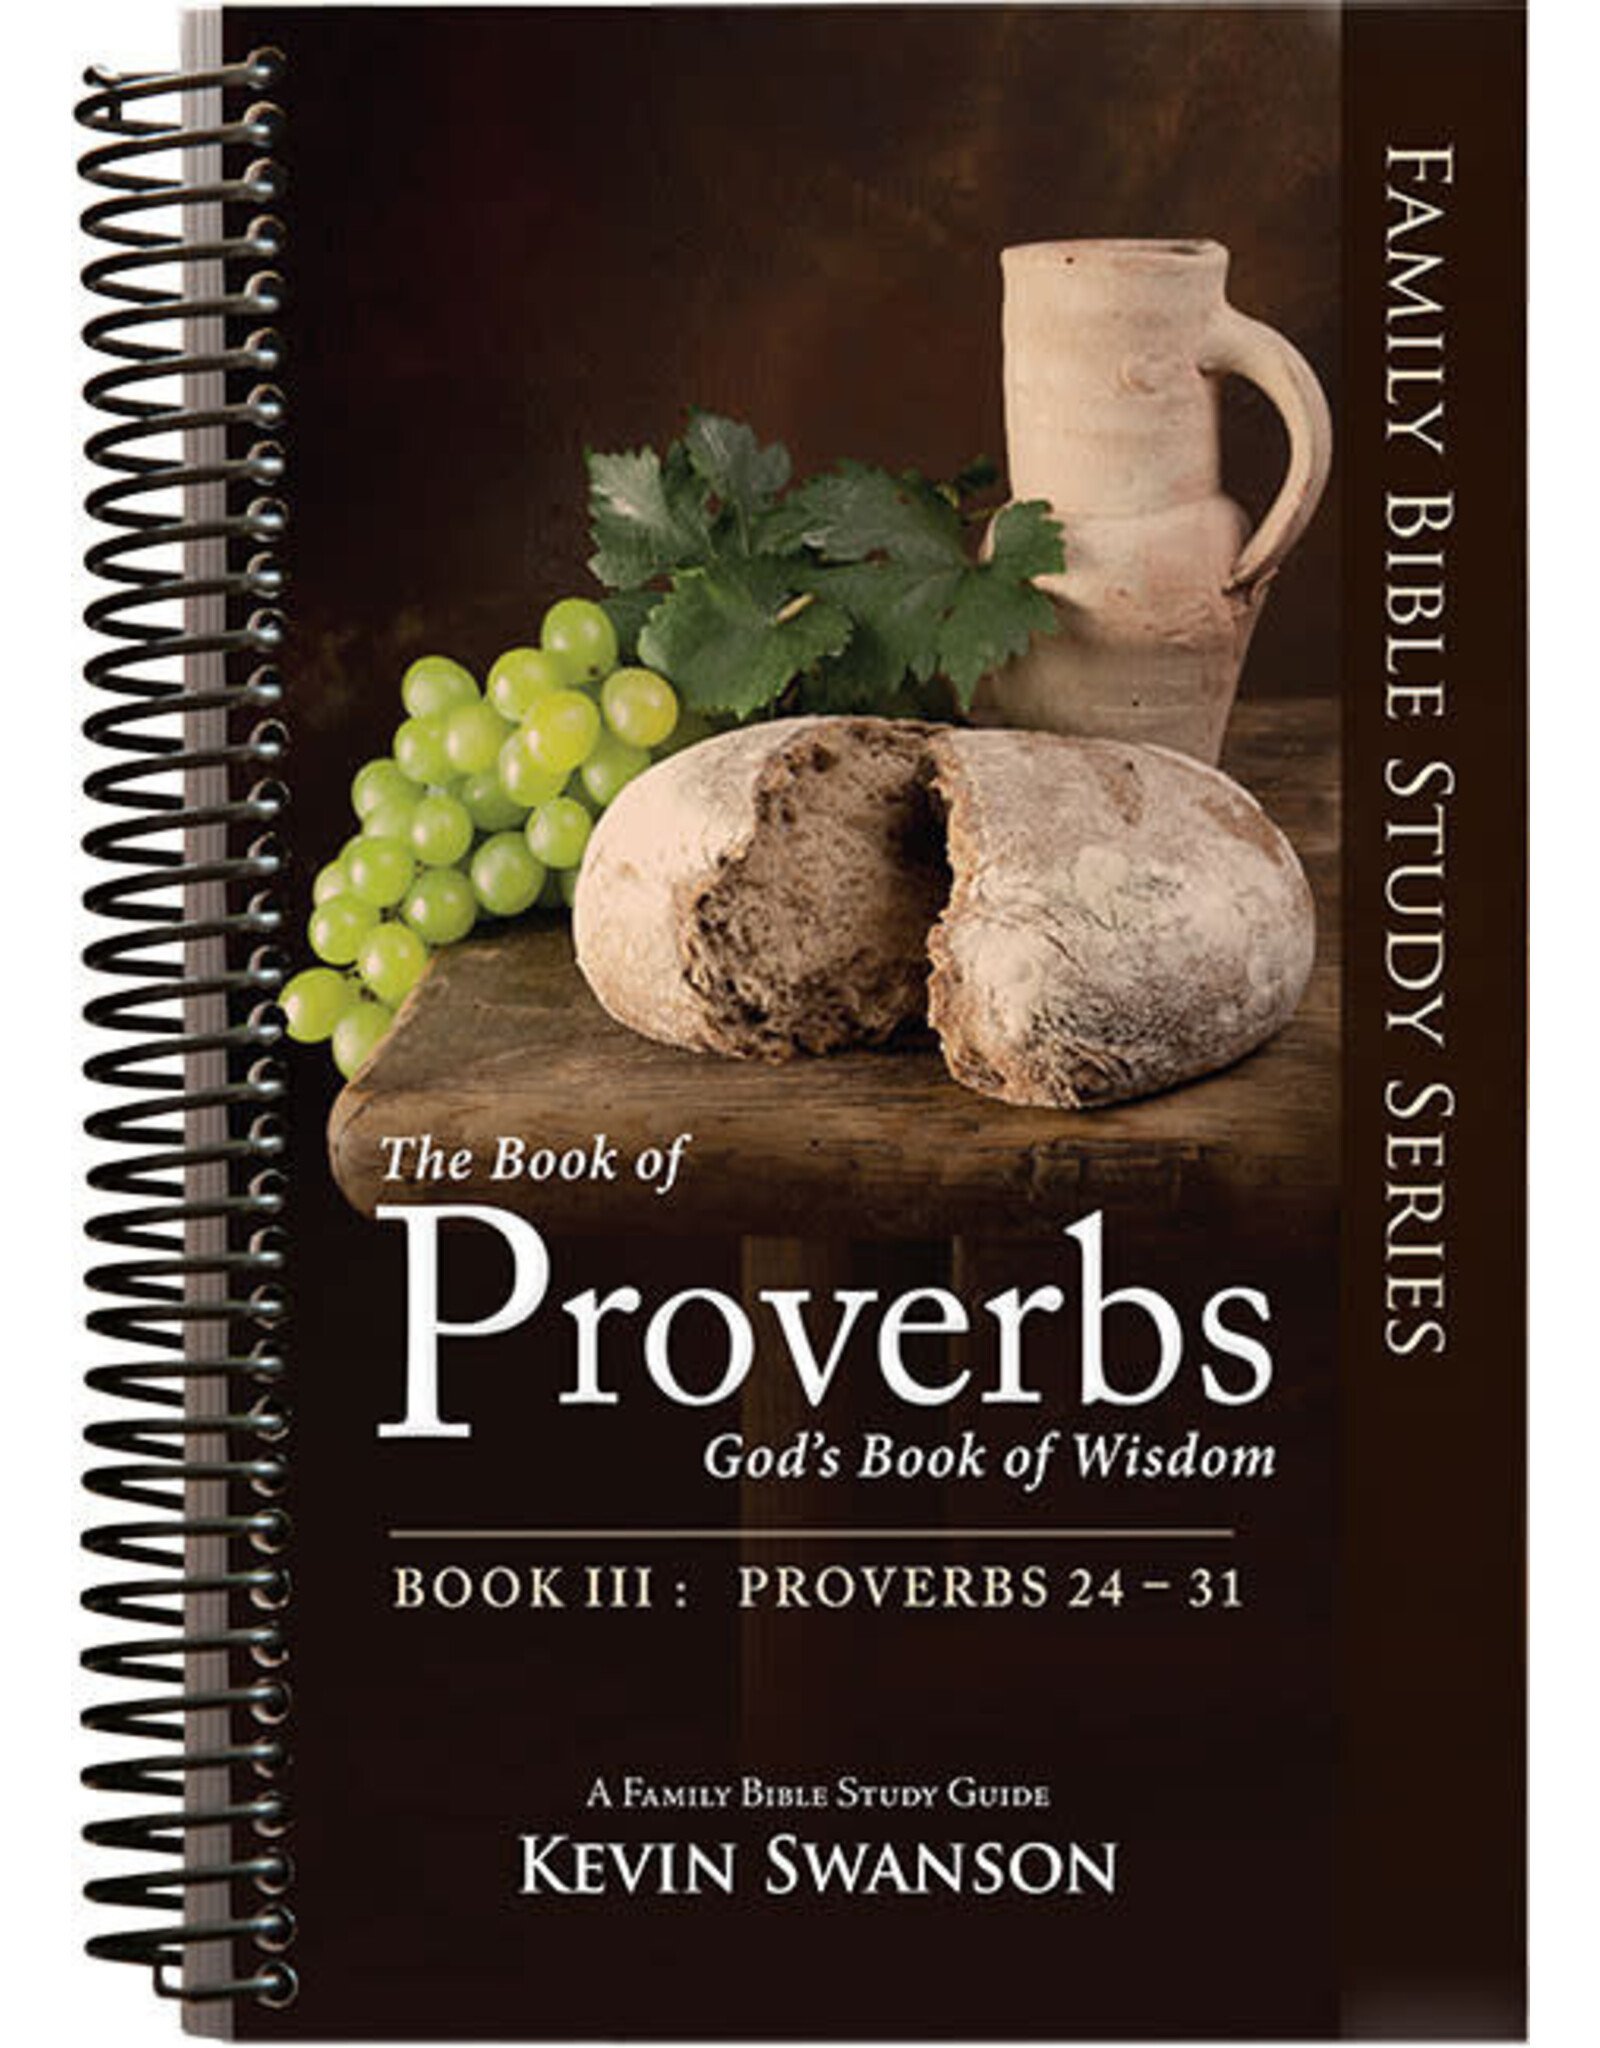 Kevin Swanson Proverbs Study Guide Book Vol. 3 (Providence. 24-31)